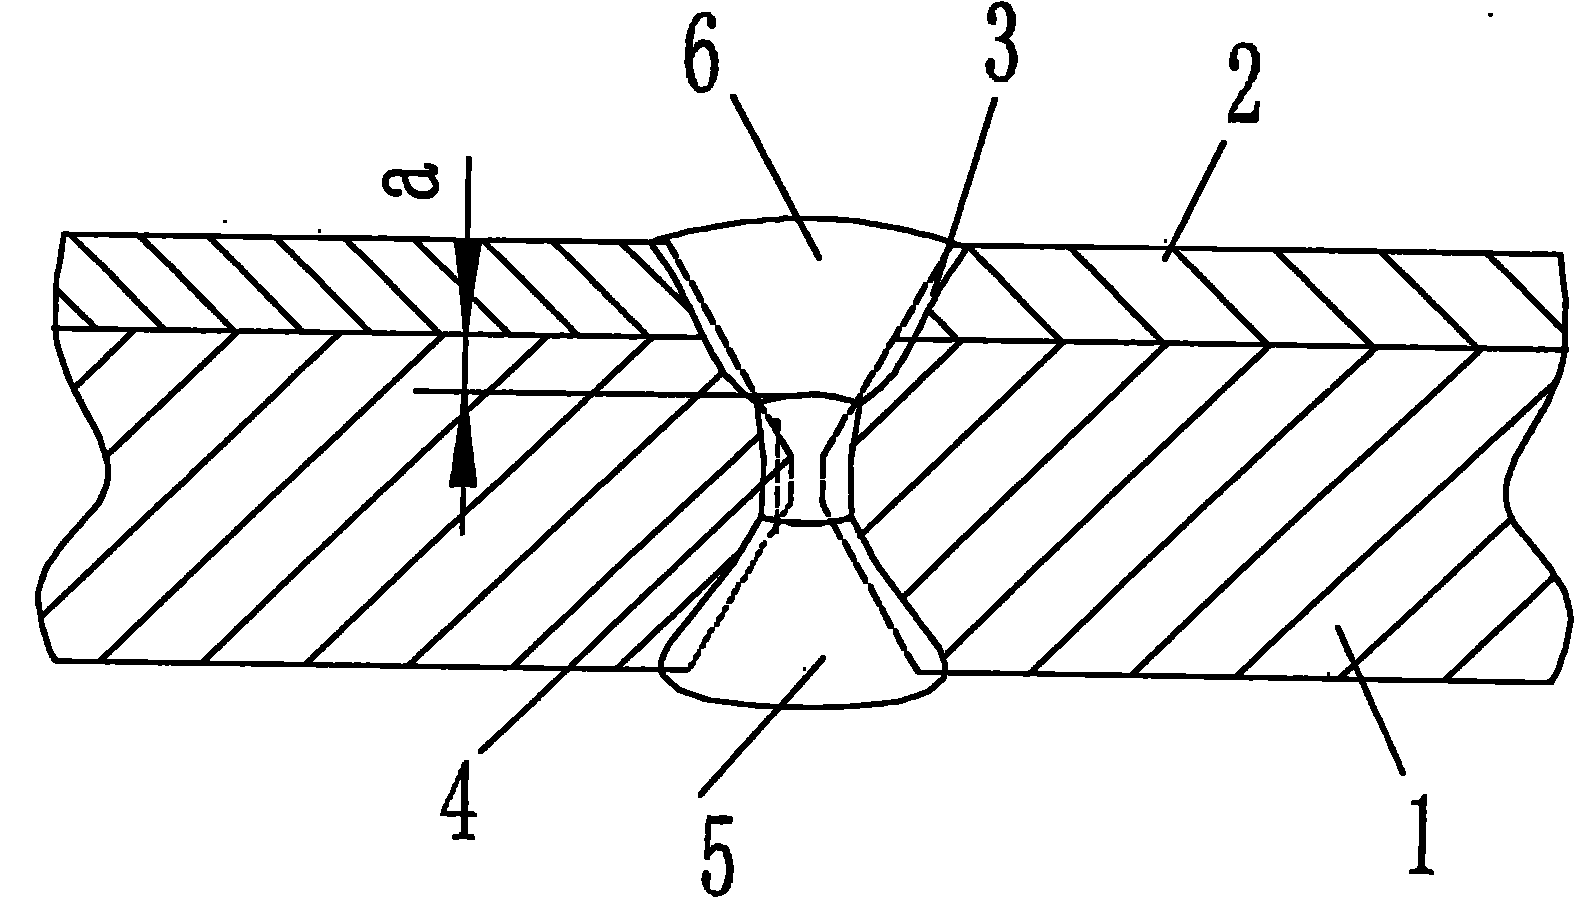 Submerged-arc welding process of stainless steel composite steel plate